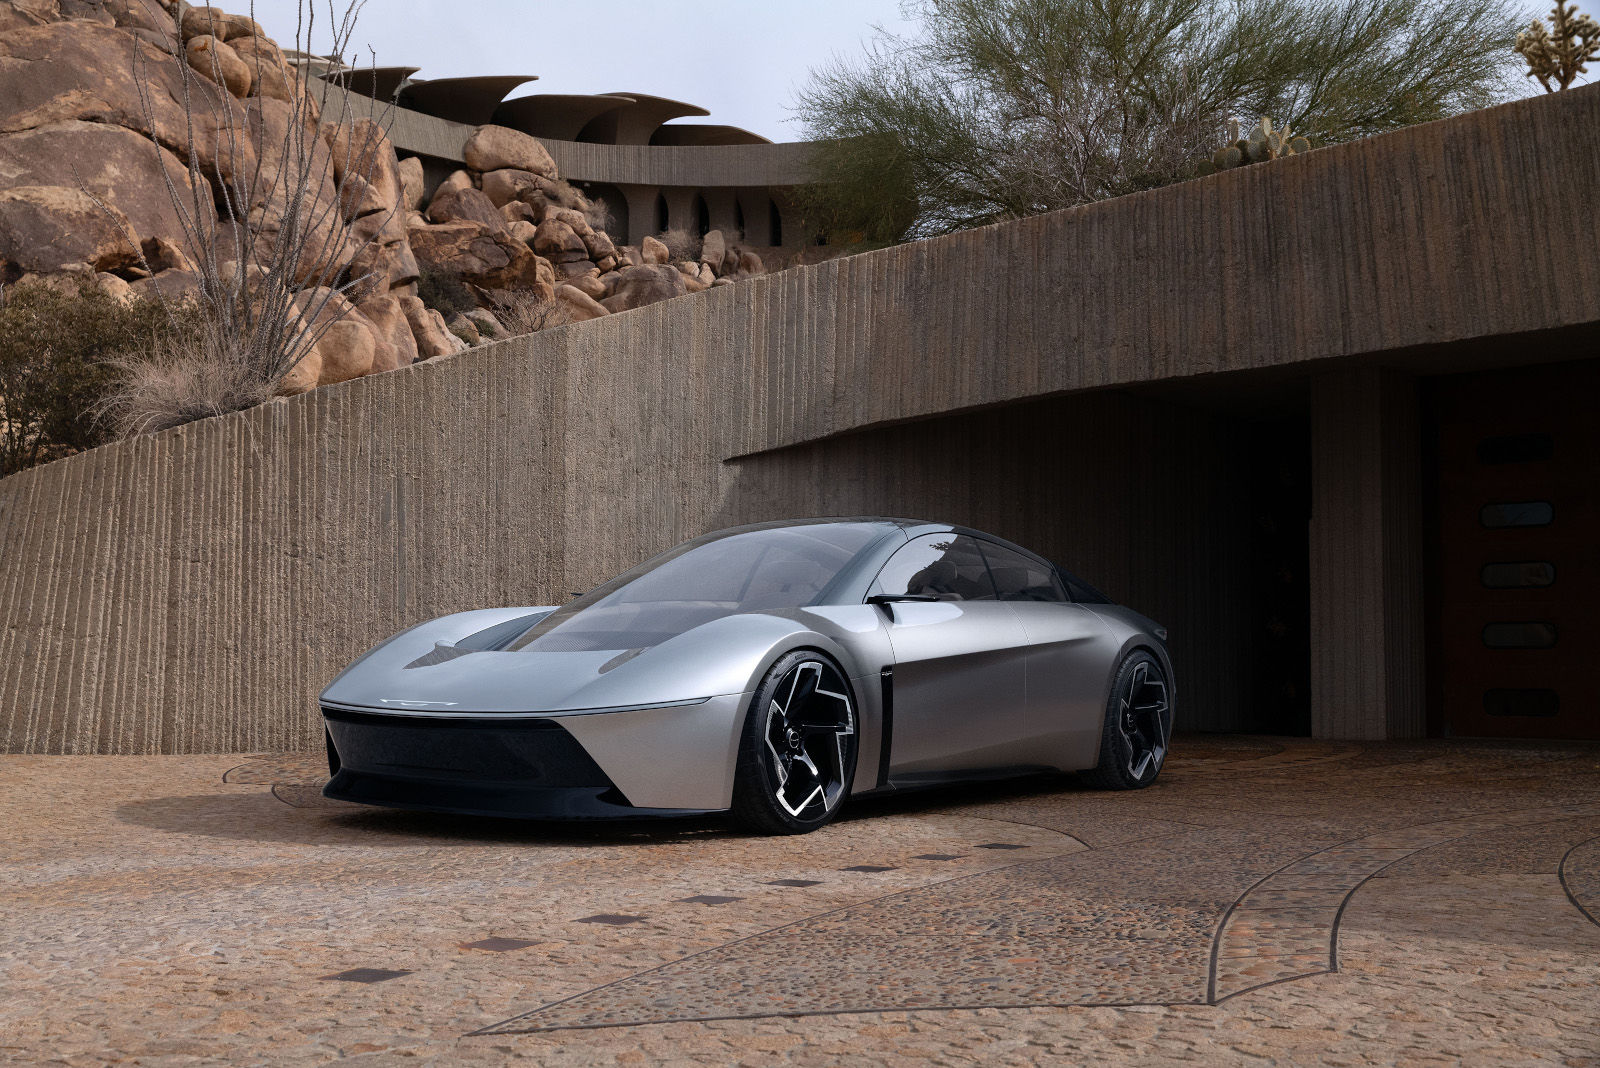 Chrysler Halcyon Concept: A Glimpse into the Future of Electrified Mobility